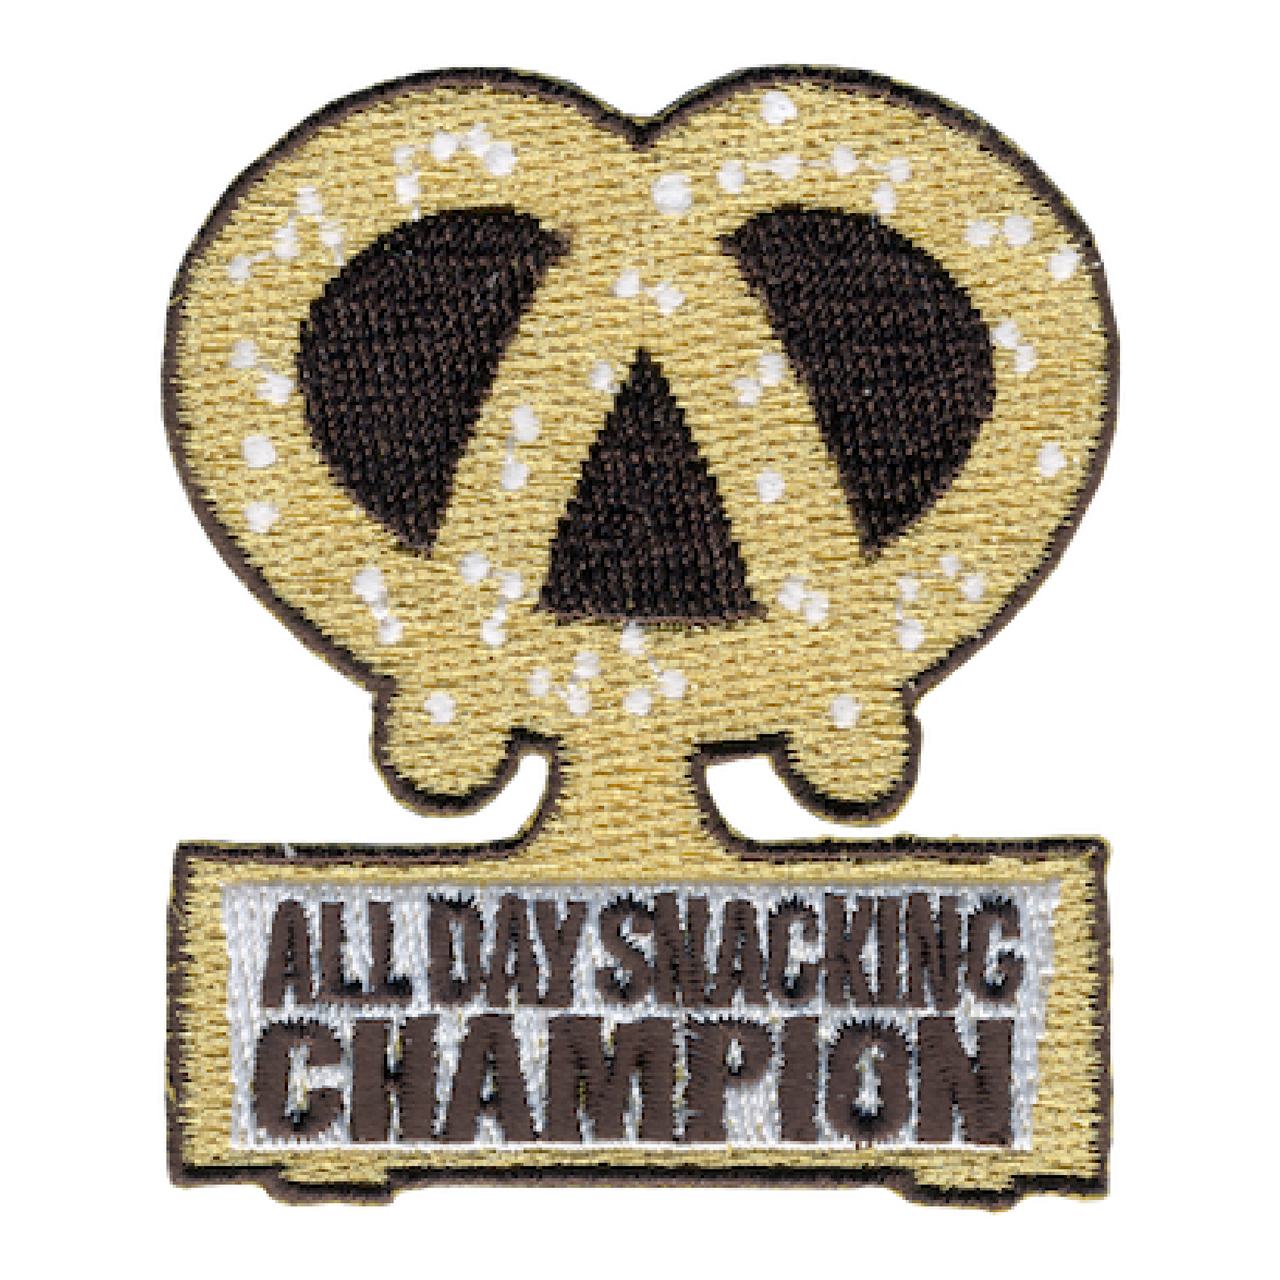 https://cdn11.bigcommerce.com/s-tvu0xuc8/images/stencil/1280x1280/products/3753/24771/All_Day_Snacking_Champion_Patch_-_IRON_ON__00672.1702404131.png?c=2